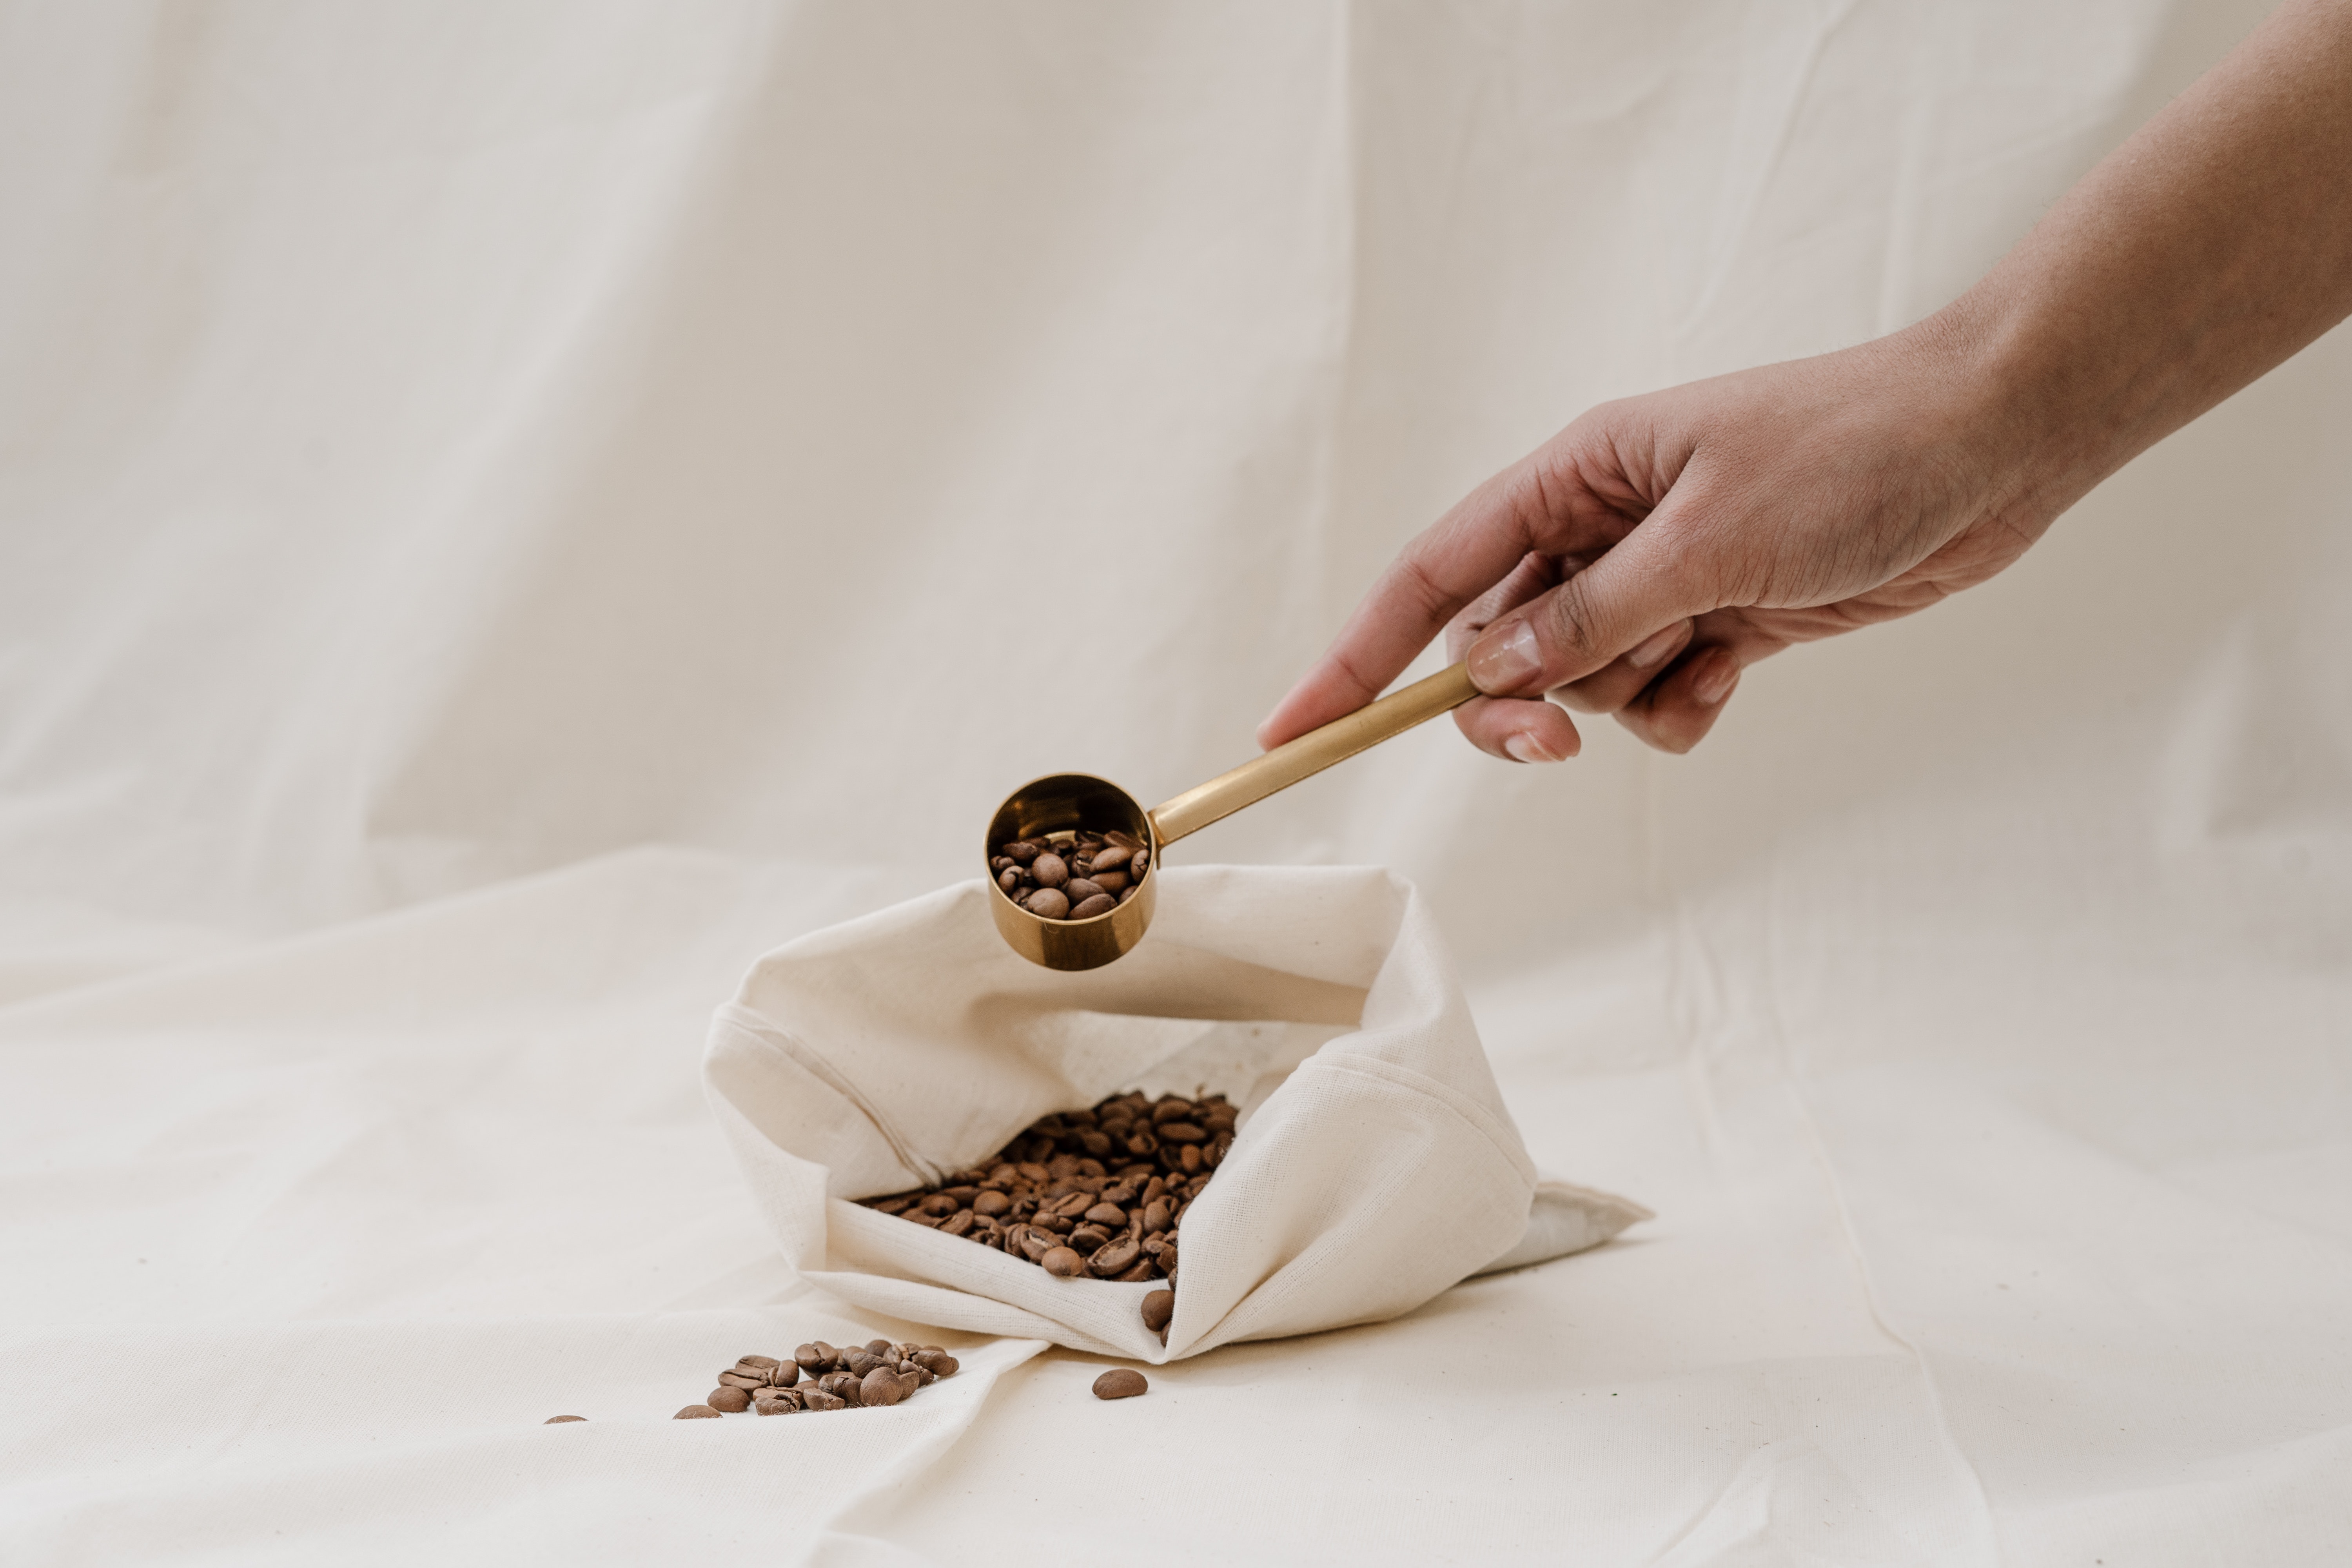 alt="Coffee beans on a sack in a photo studio"